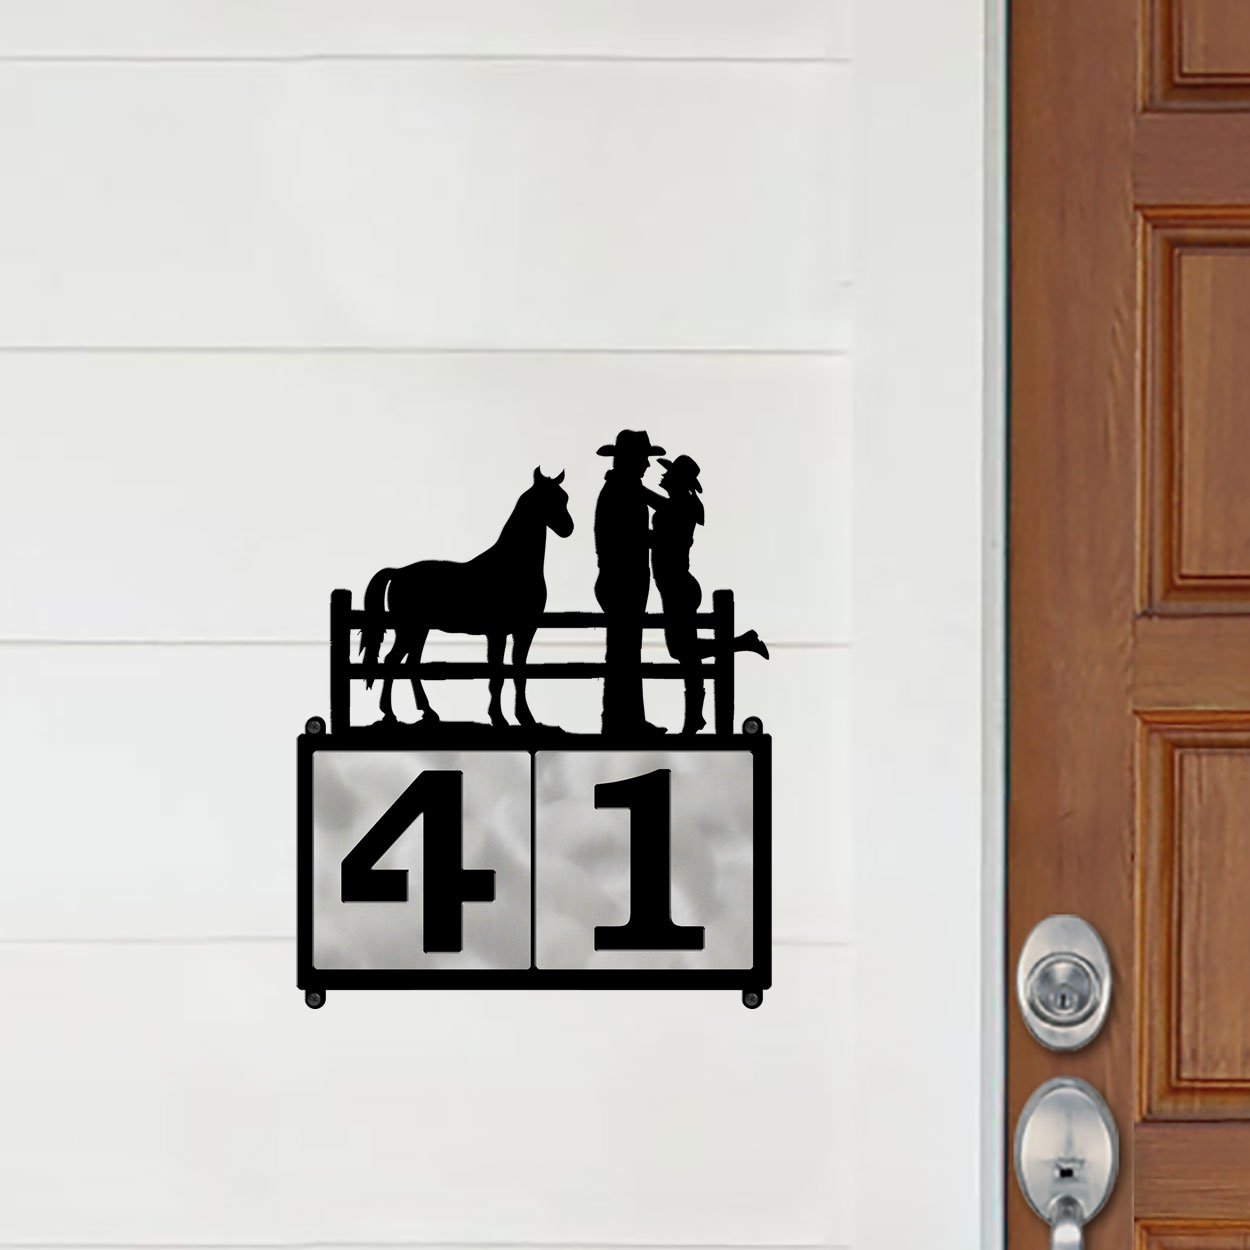 609112 - XL Cowboy Couple with Horse Design 2-Digit Horizontal 6in Tile Outdoor House Numbers